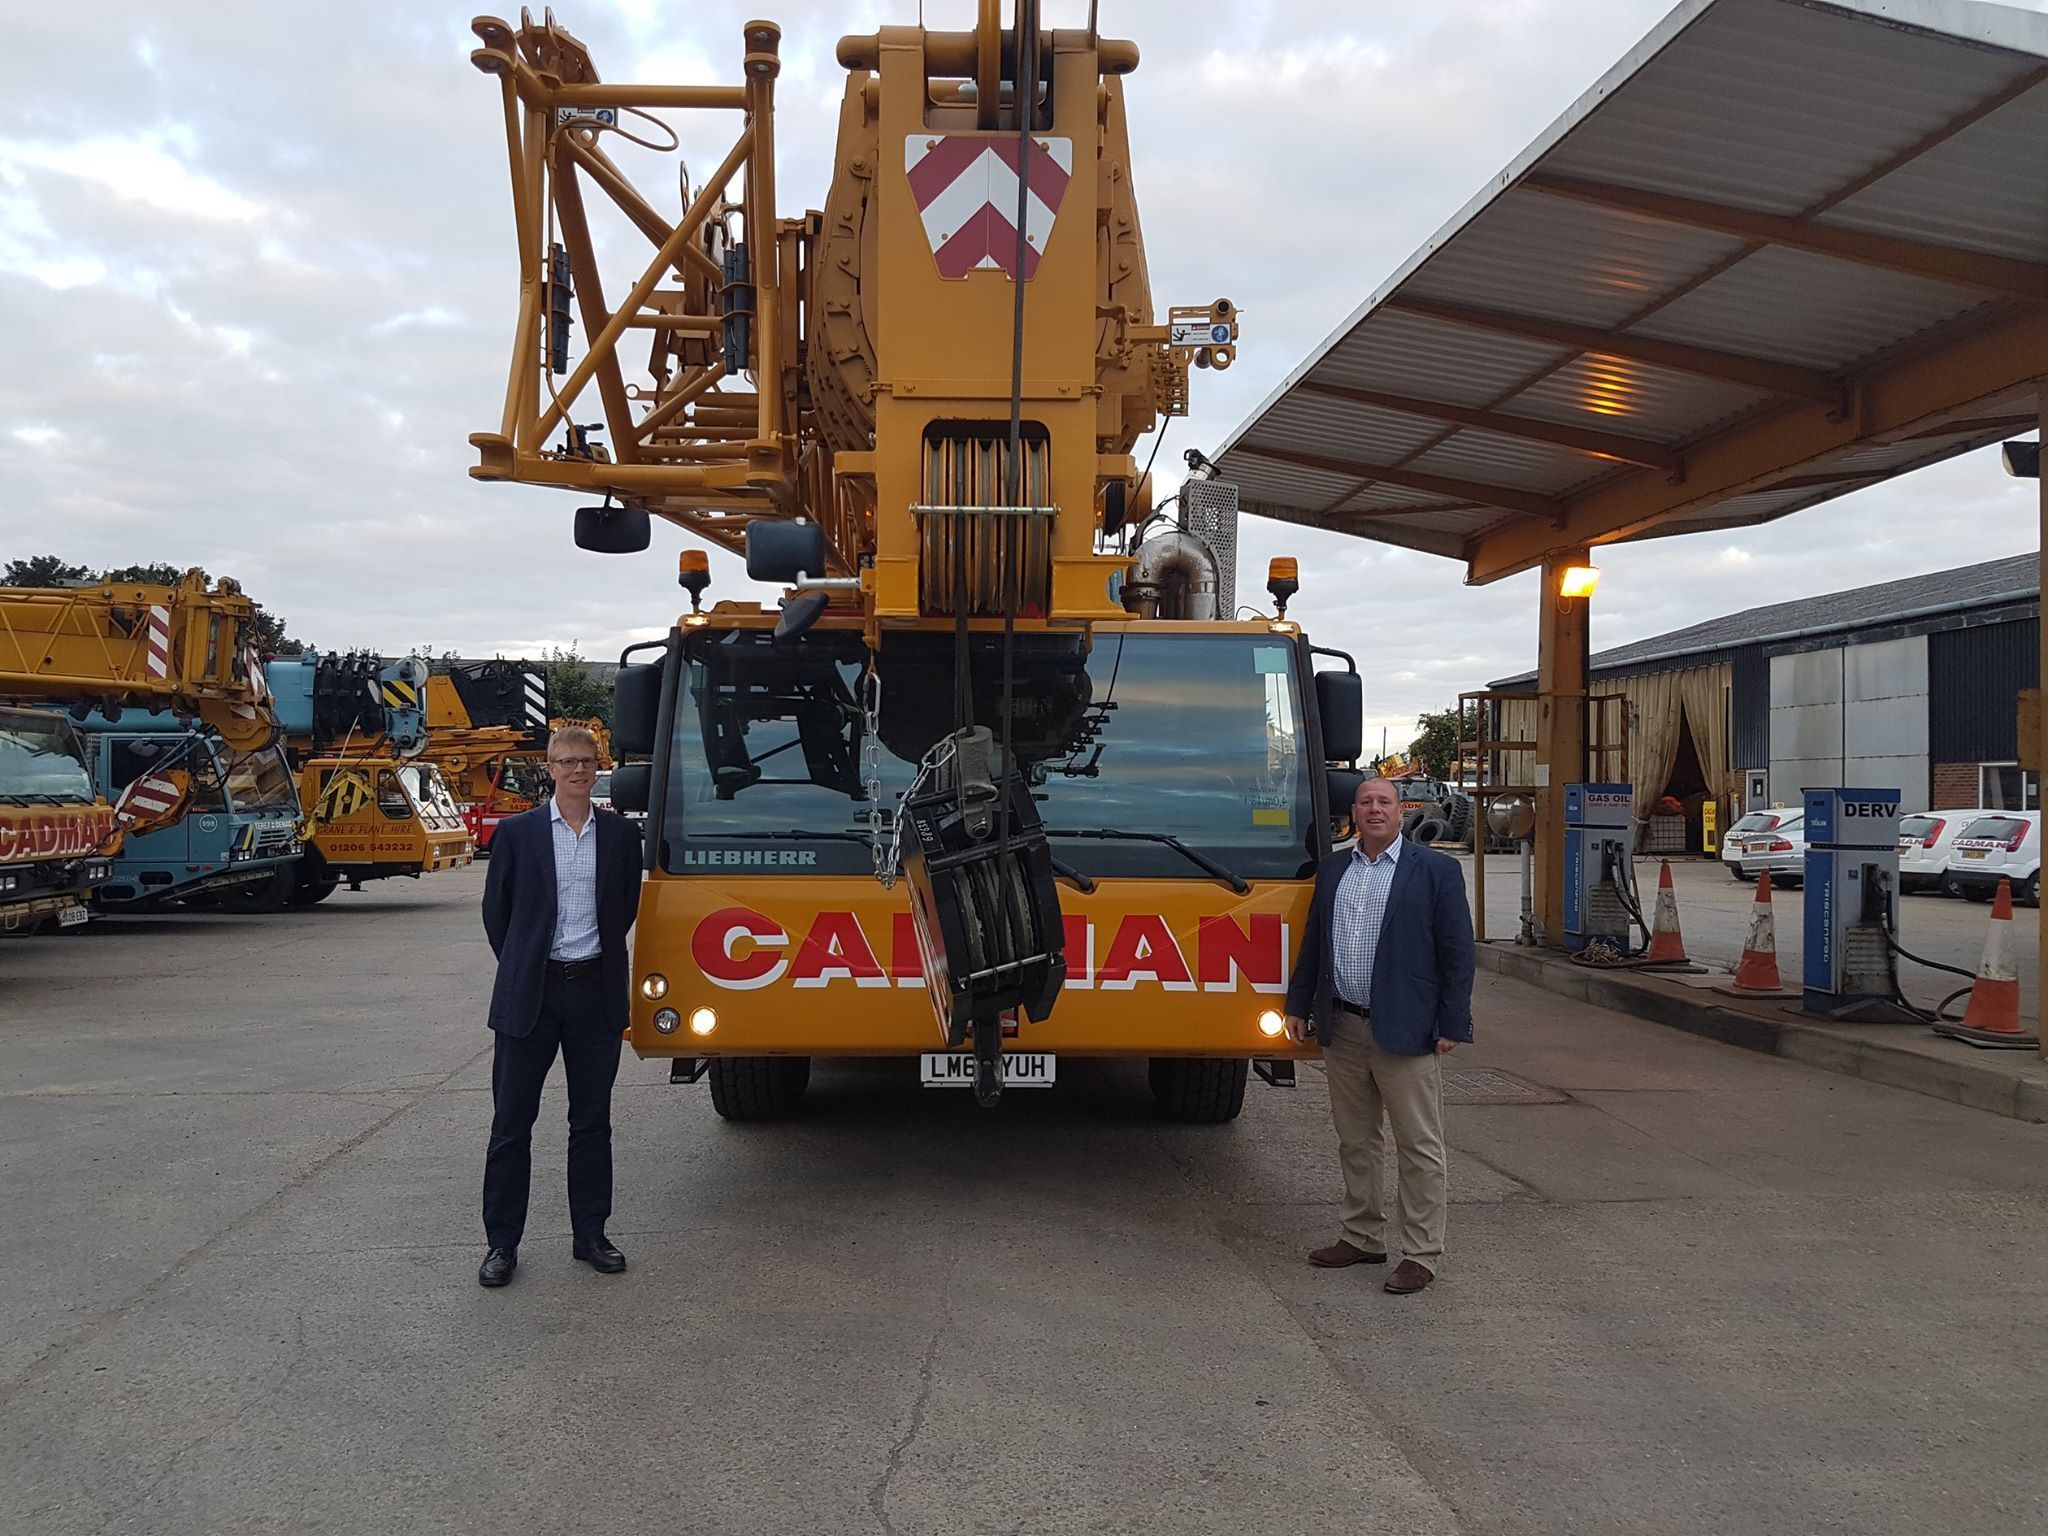 Sean Milbank and Andy Mayne stand in front of Cadman Crane